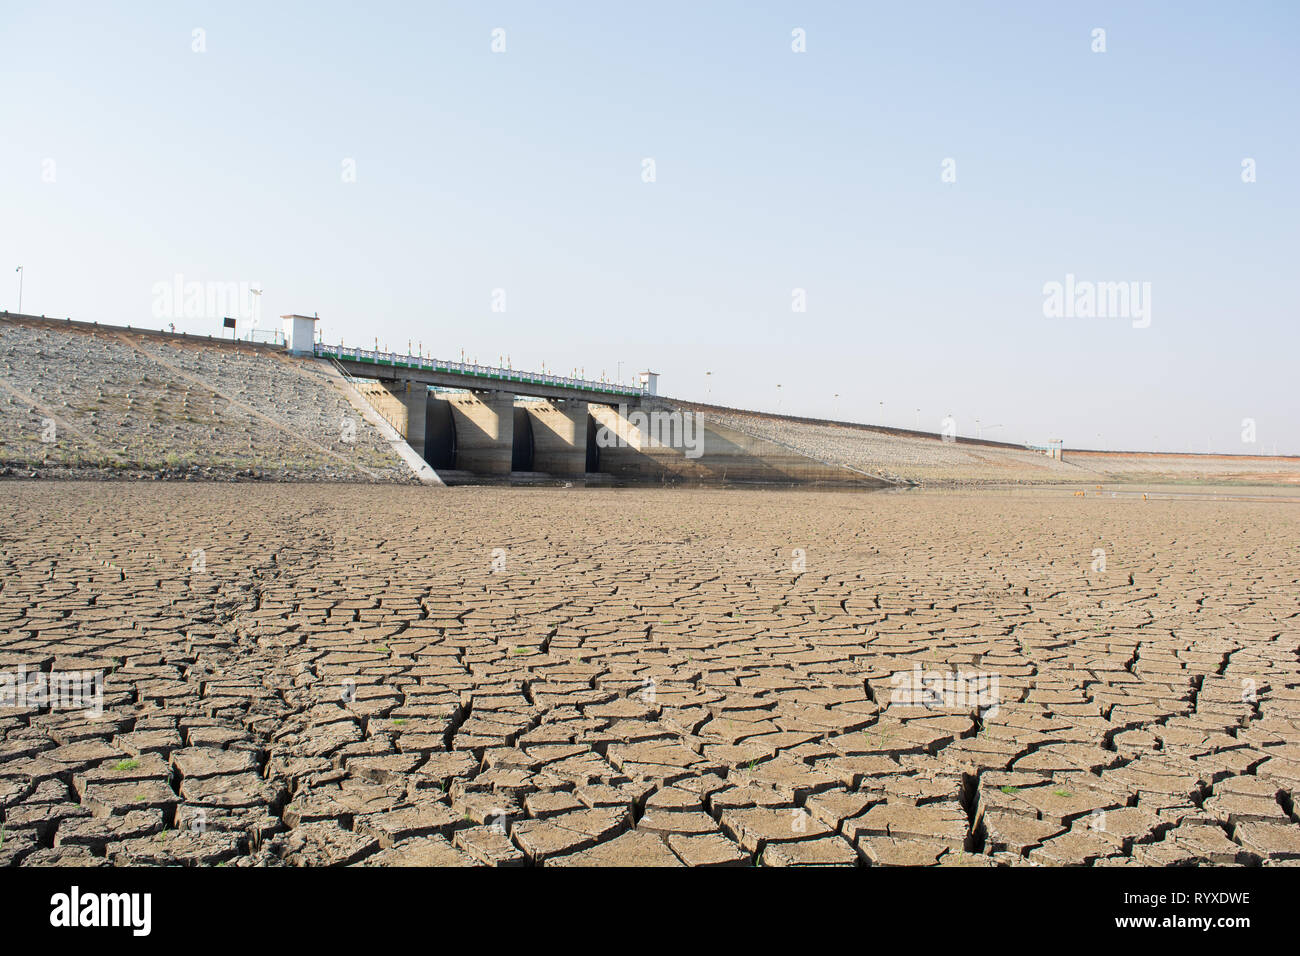 A dried up empty reservoir or dam during a summer heatwave, low rainfall and drought in north karnataka,India Stock Photo